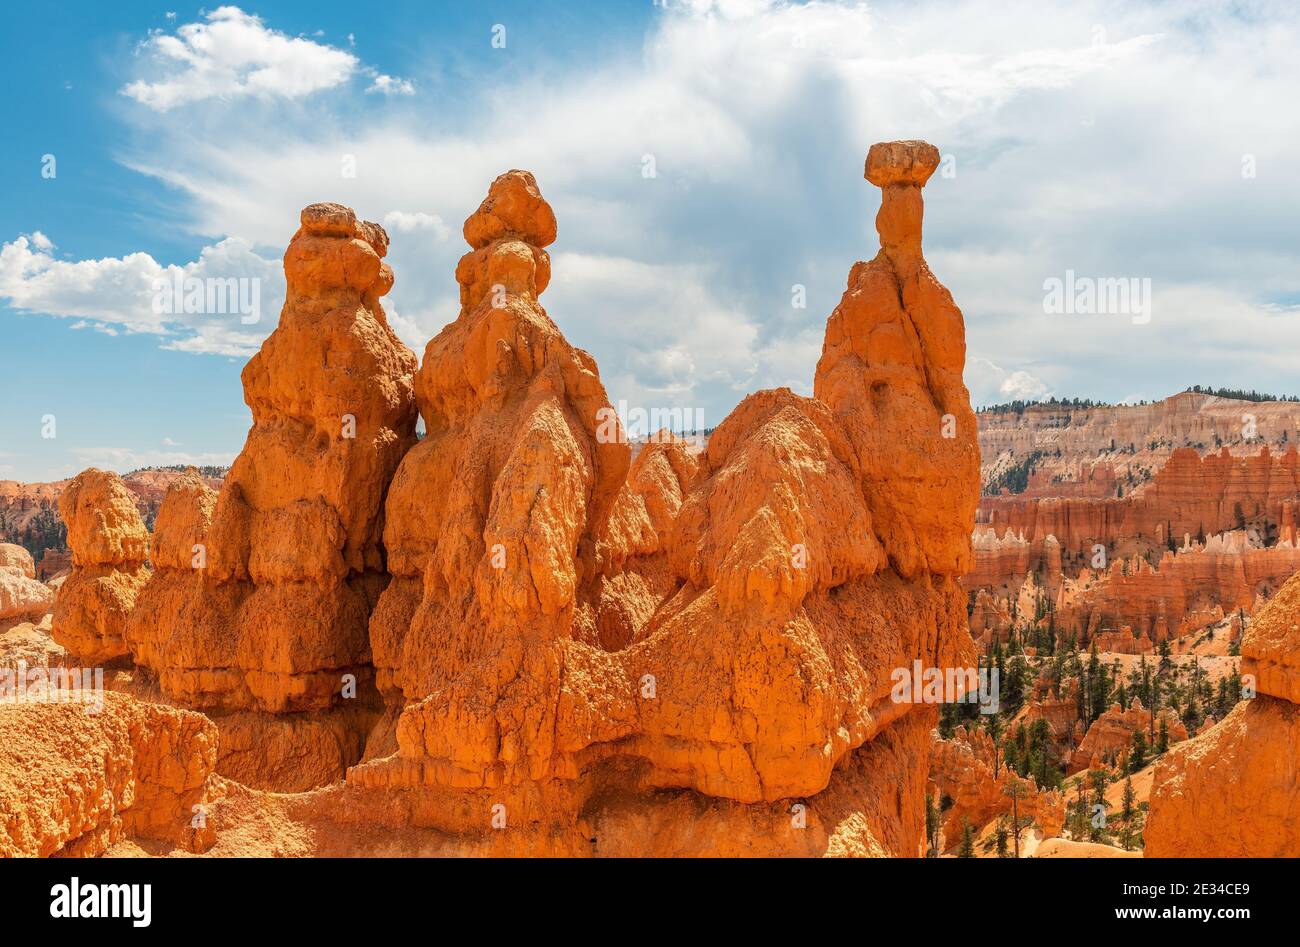 Hoodoo sandstone rock formations with Thor's hammer, Bryce Canyon national park, Utah, United States of America (USA). Stock Photo